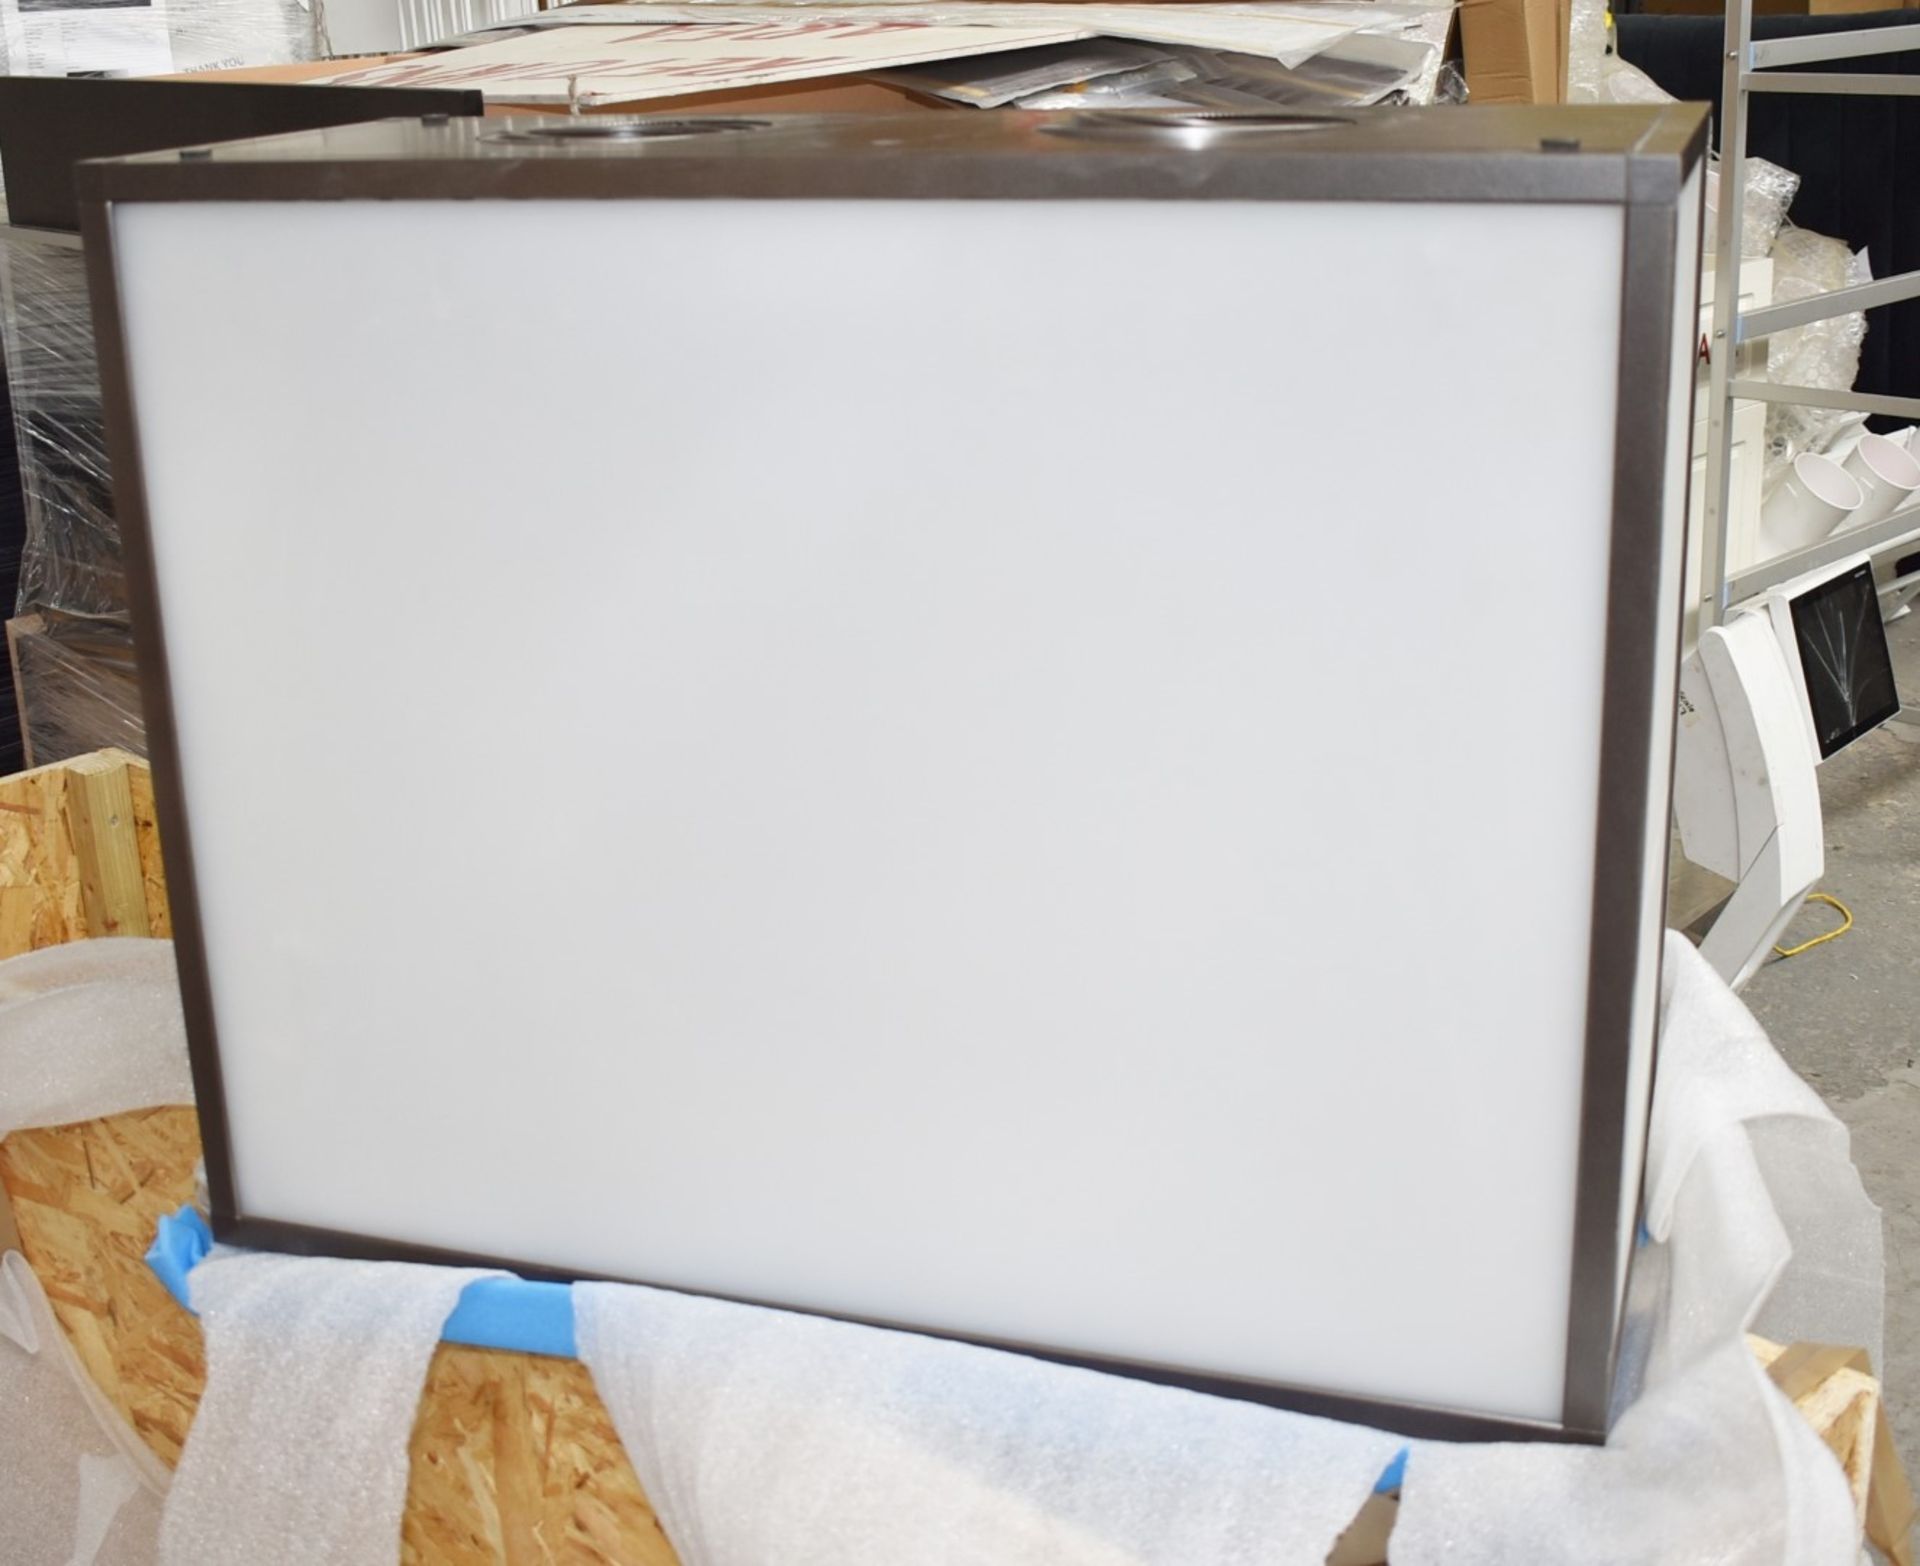 1 x Illuminated Ceiling Light From a Famous London Department Store - 5 Interconnecting Box Lights - Image 5 of 22